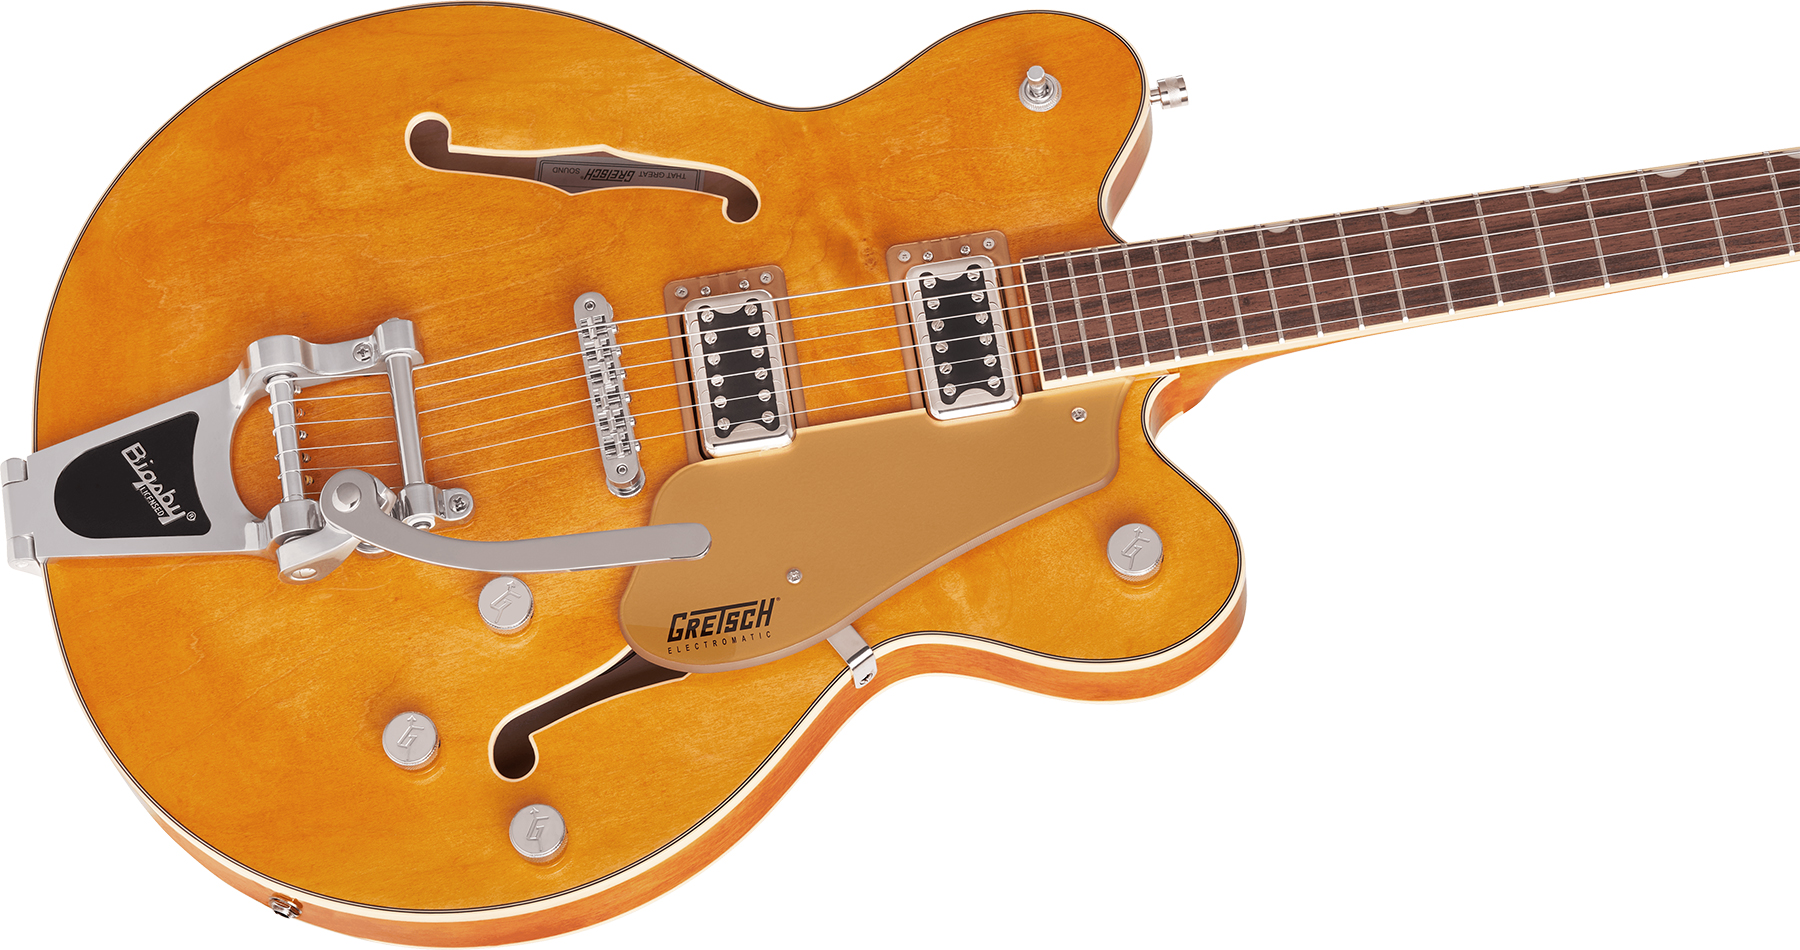 Gretsch G5622t Center Bloc Double Cut Bigsby Electromatic Hh Trem Lau - Speyside - Semi-hollow electric guitar - Variation 2